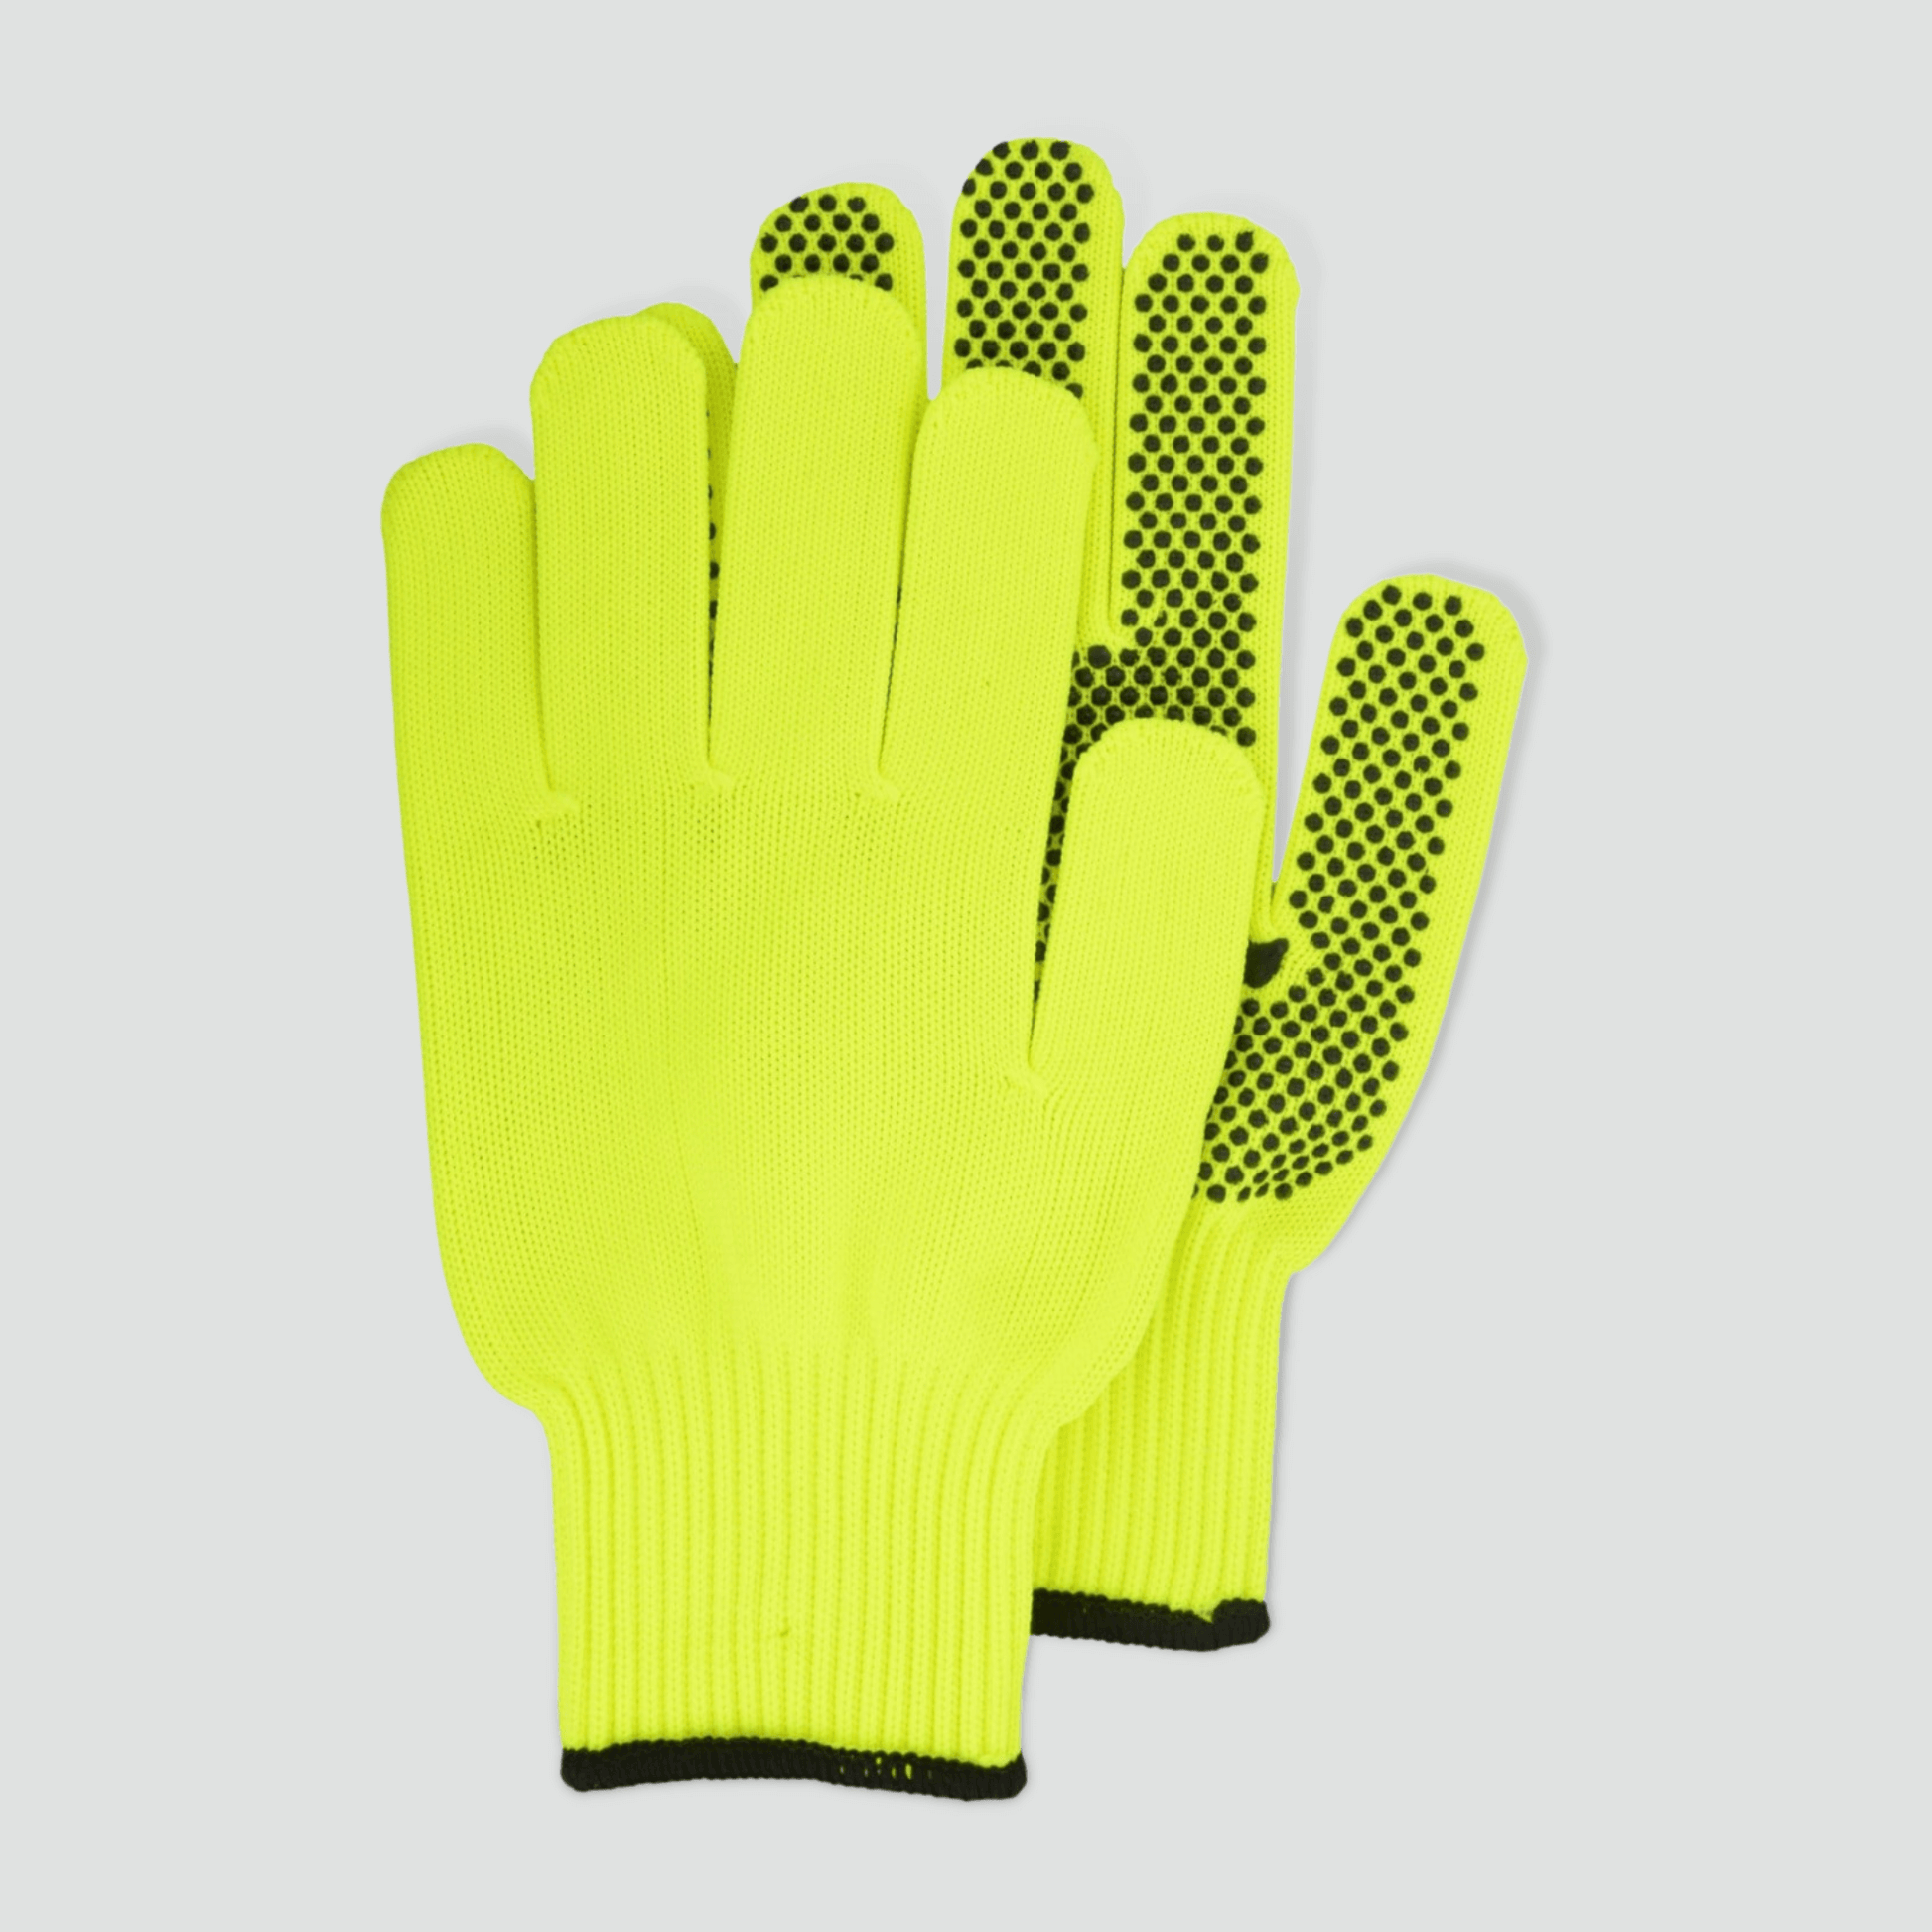 Safety gloves, with rubber for added grip